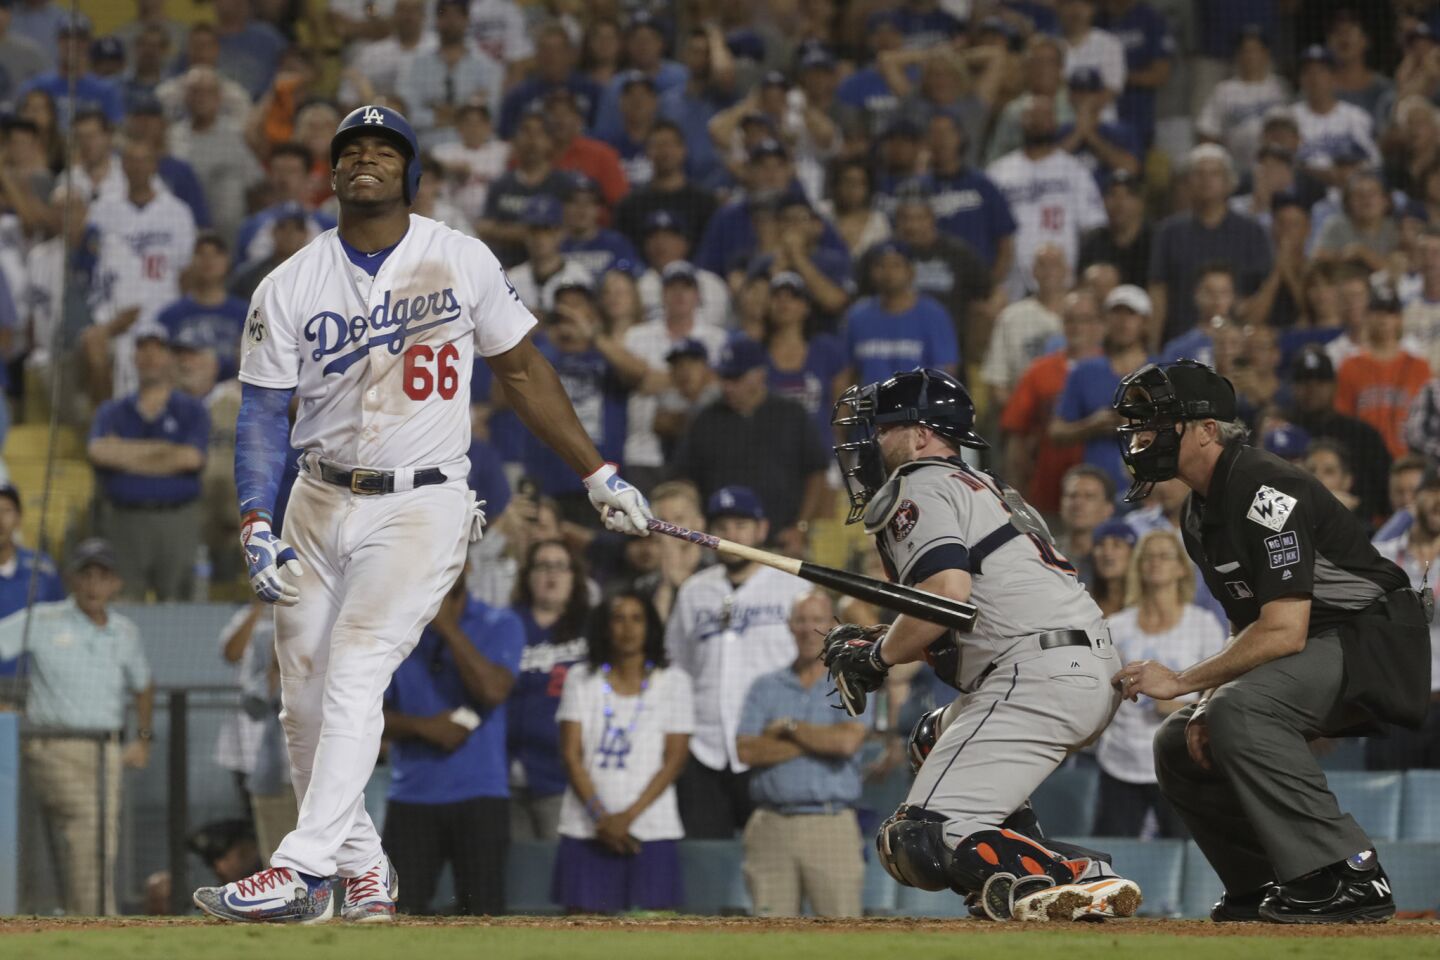 Dodgers right fielder Yasiel Puig strikes out to end the game.